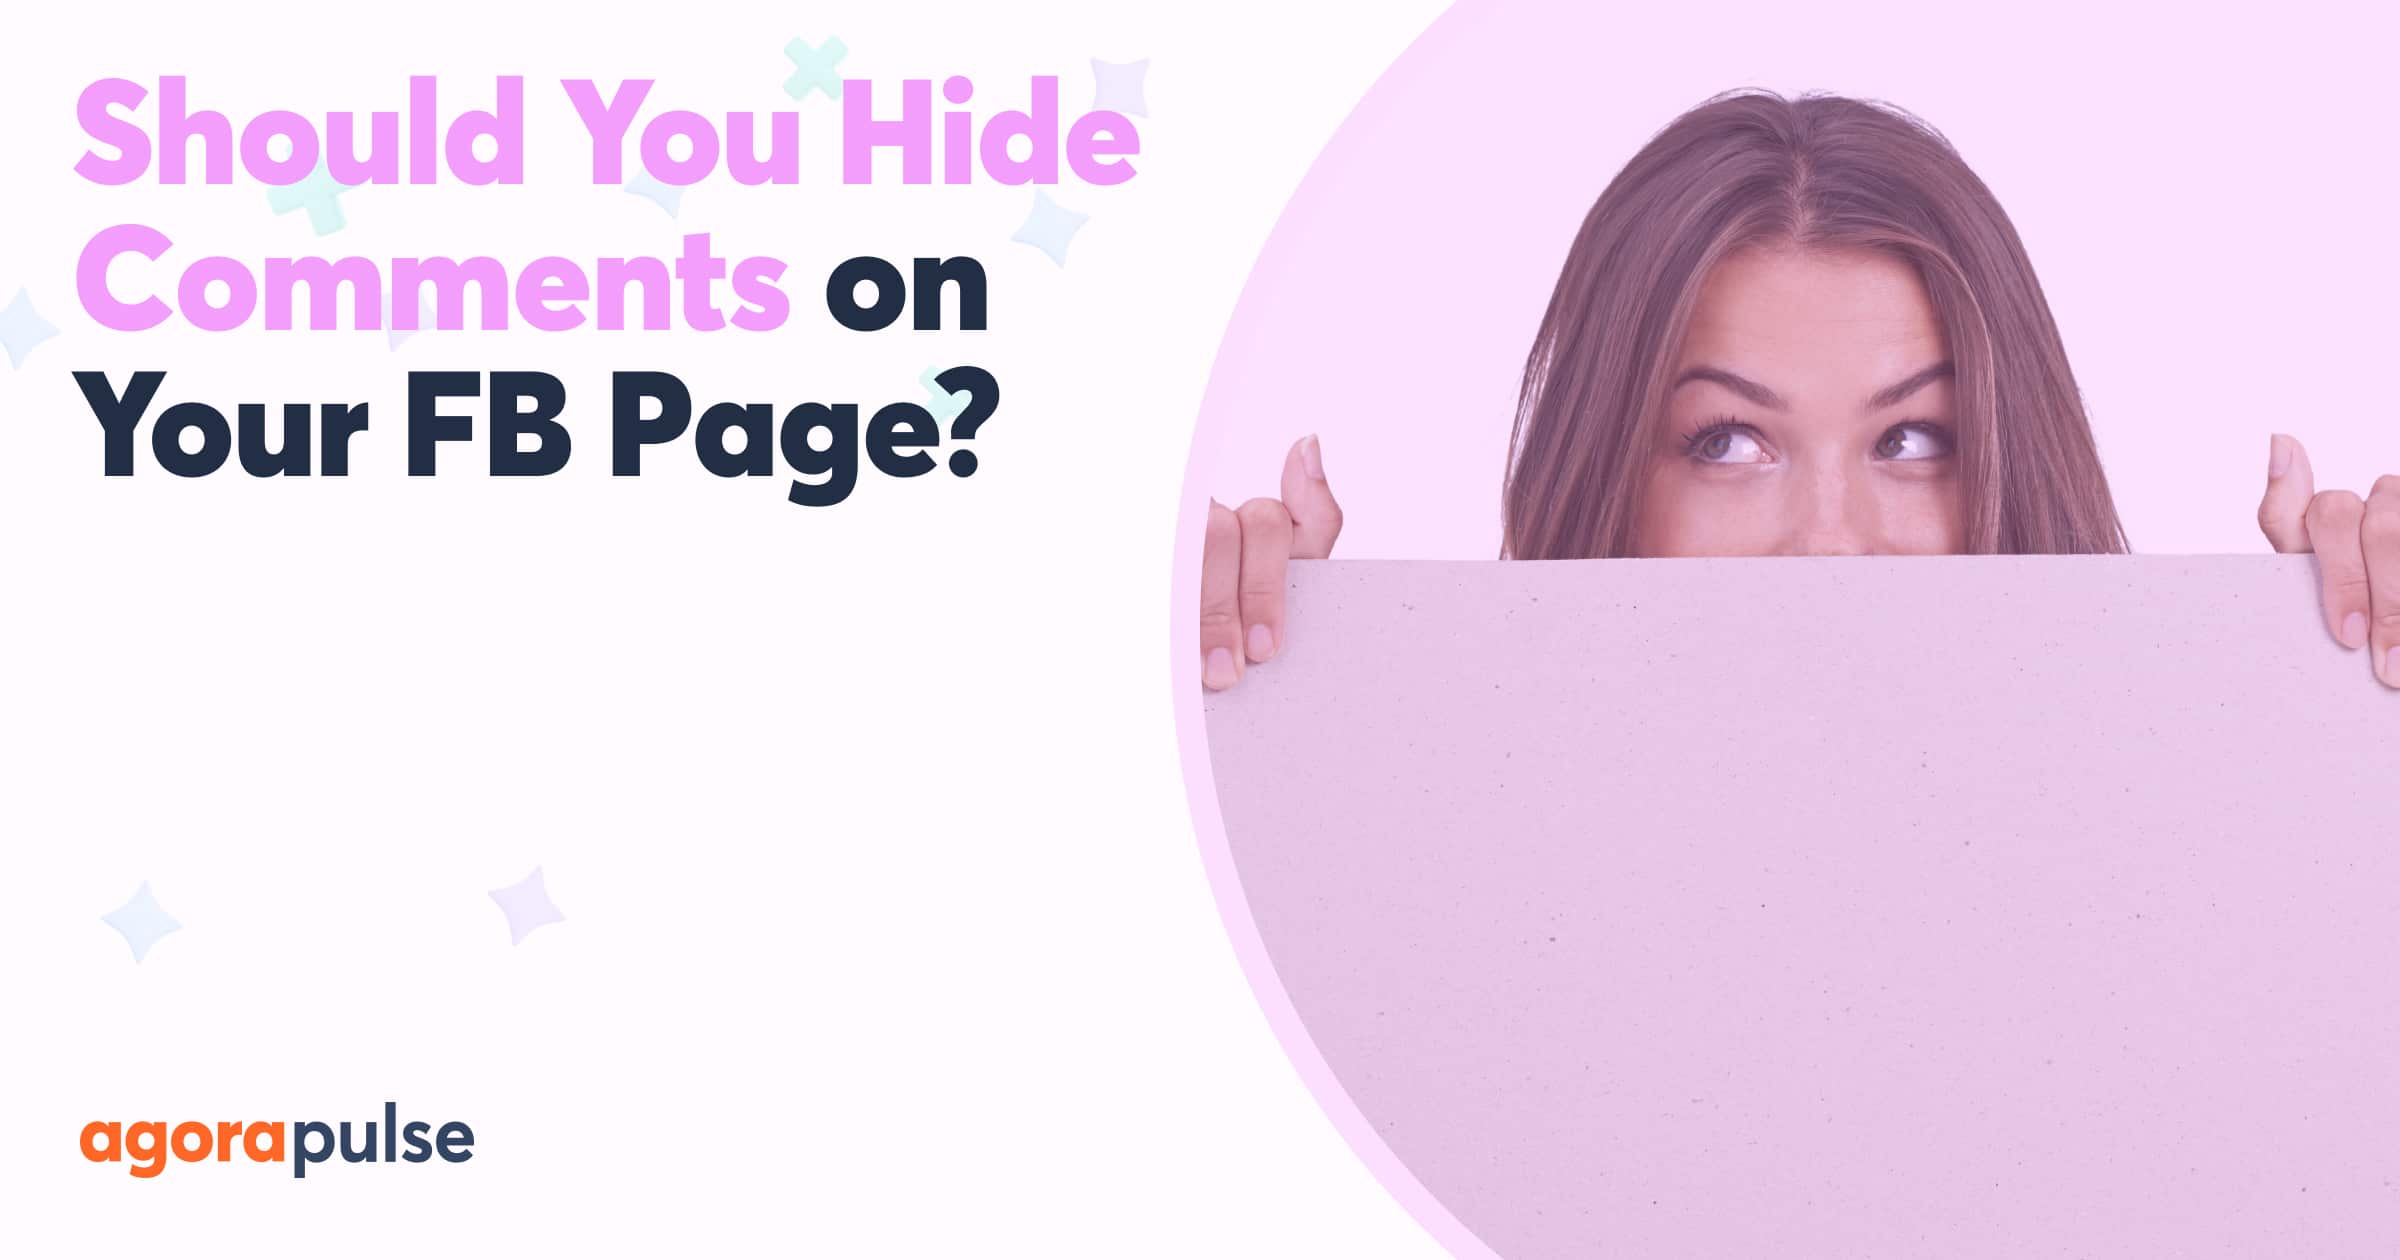 What Happens When You Hide a Comment on Facebook?